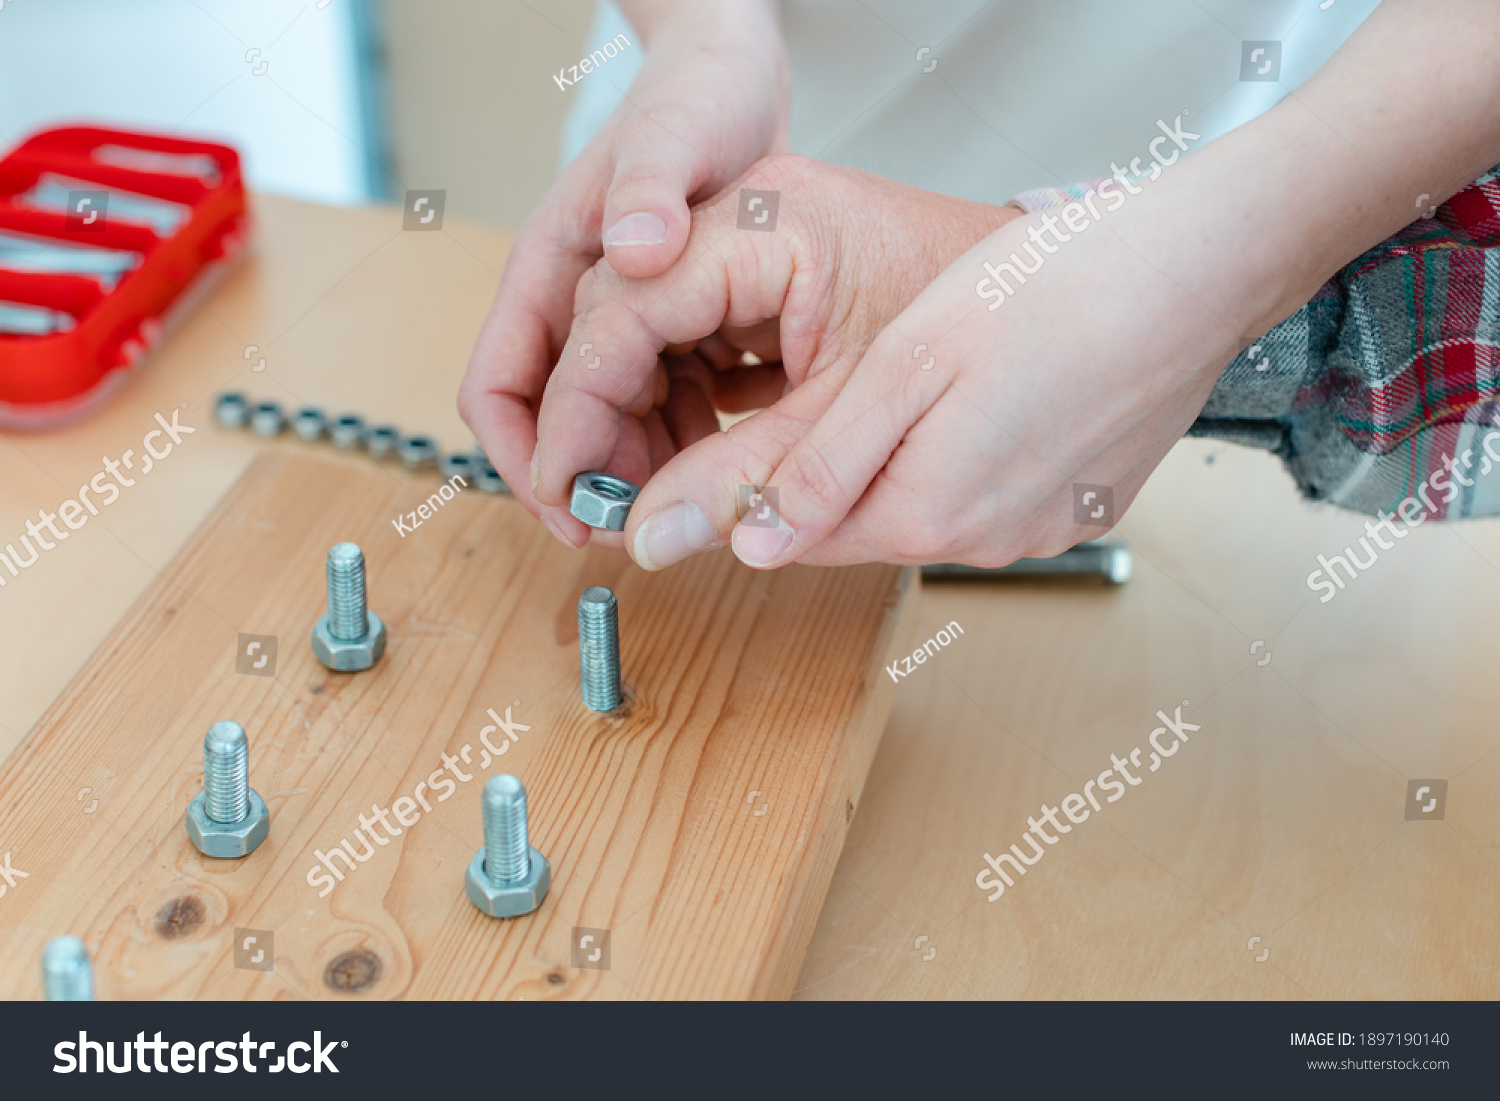 Closeup on hand of man in occupational therapy screwing nut on bolt #1897190140